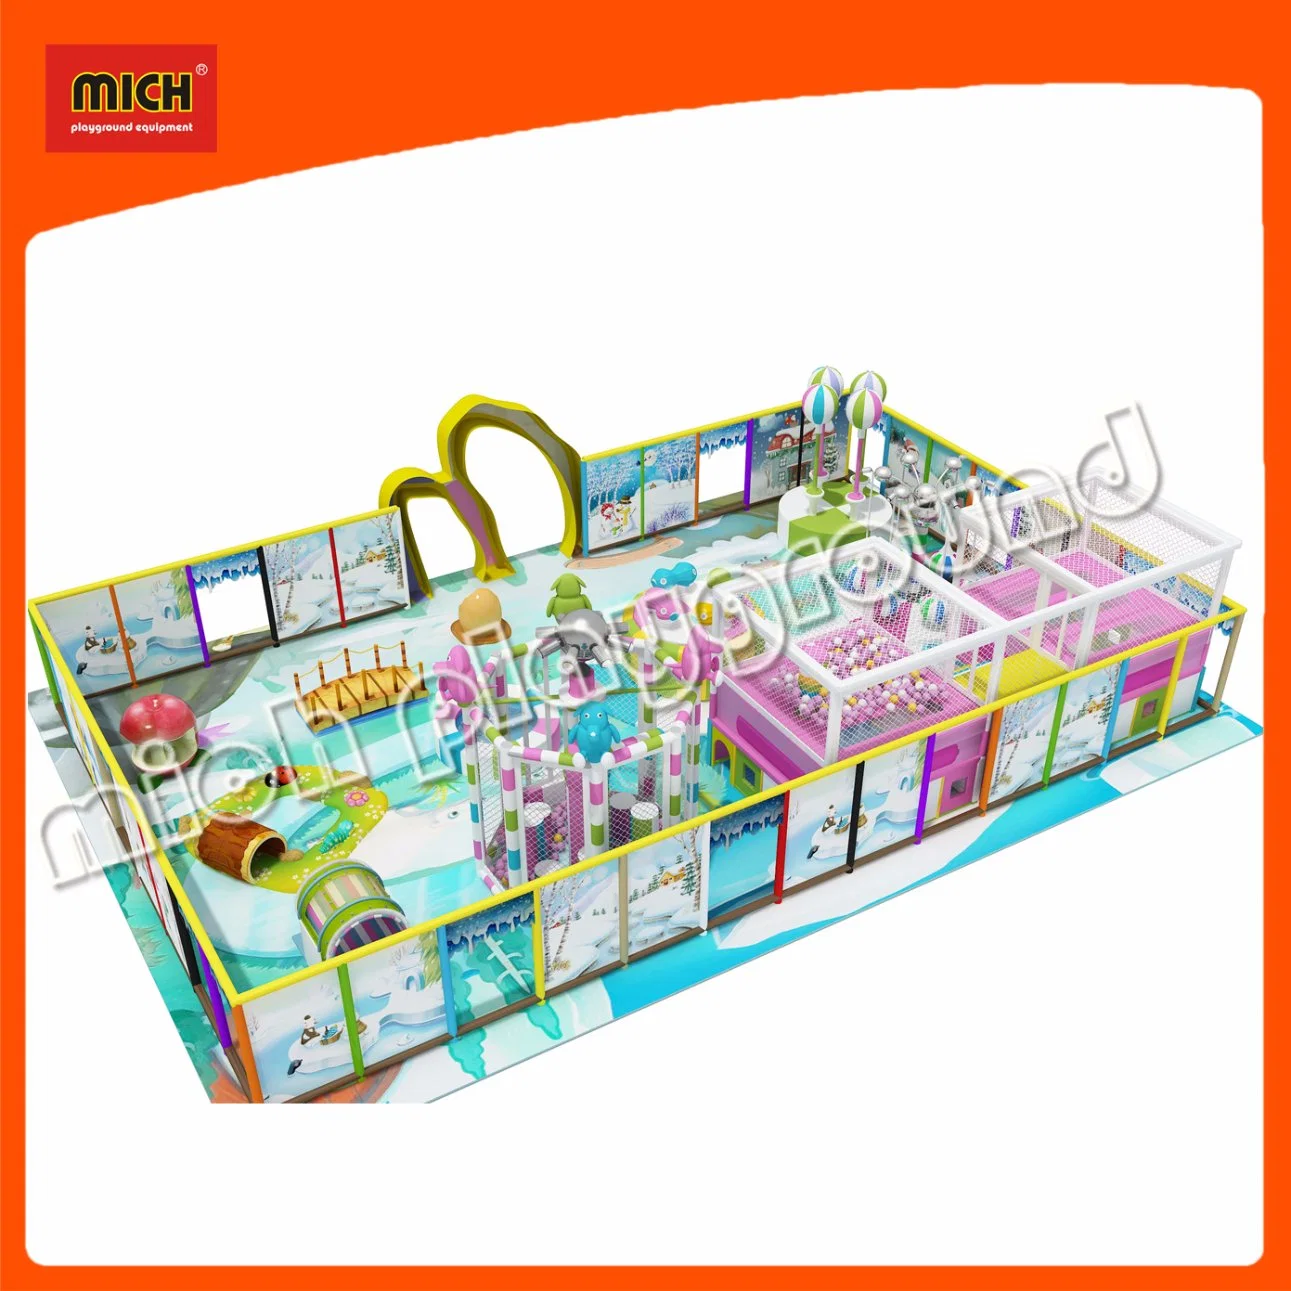 Mich Toddler Soft Play Toys Amusement Park